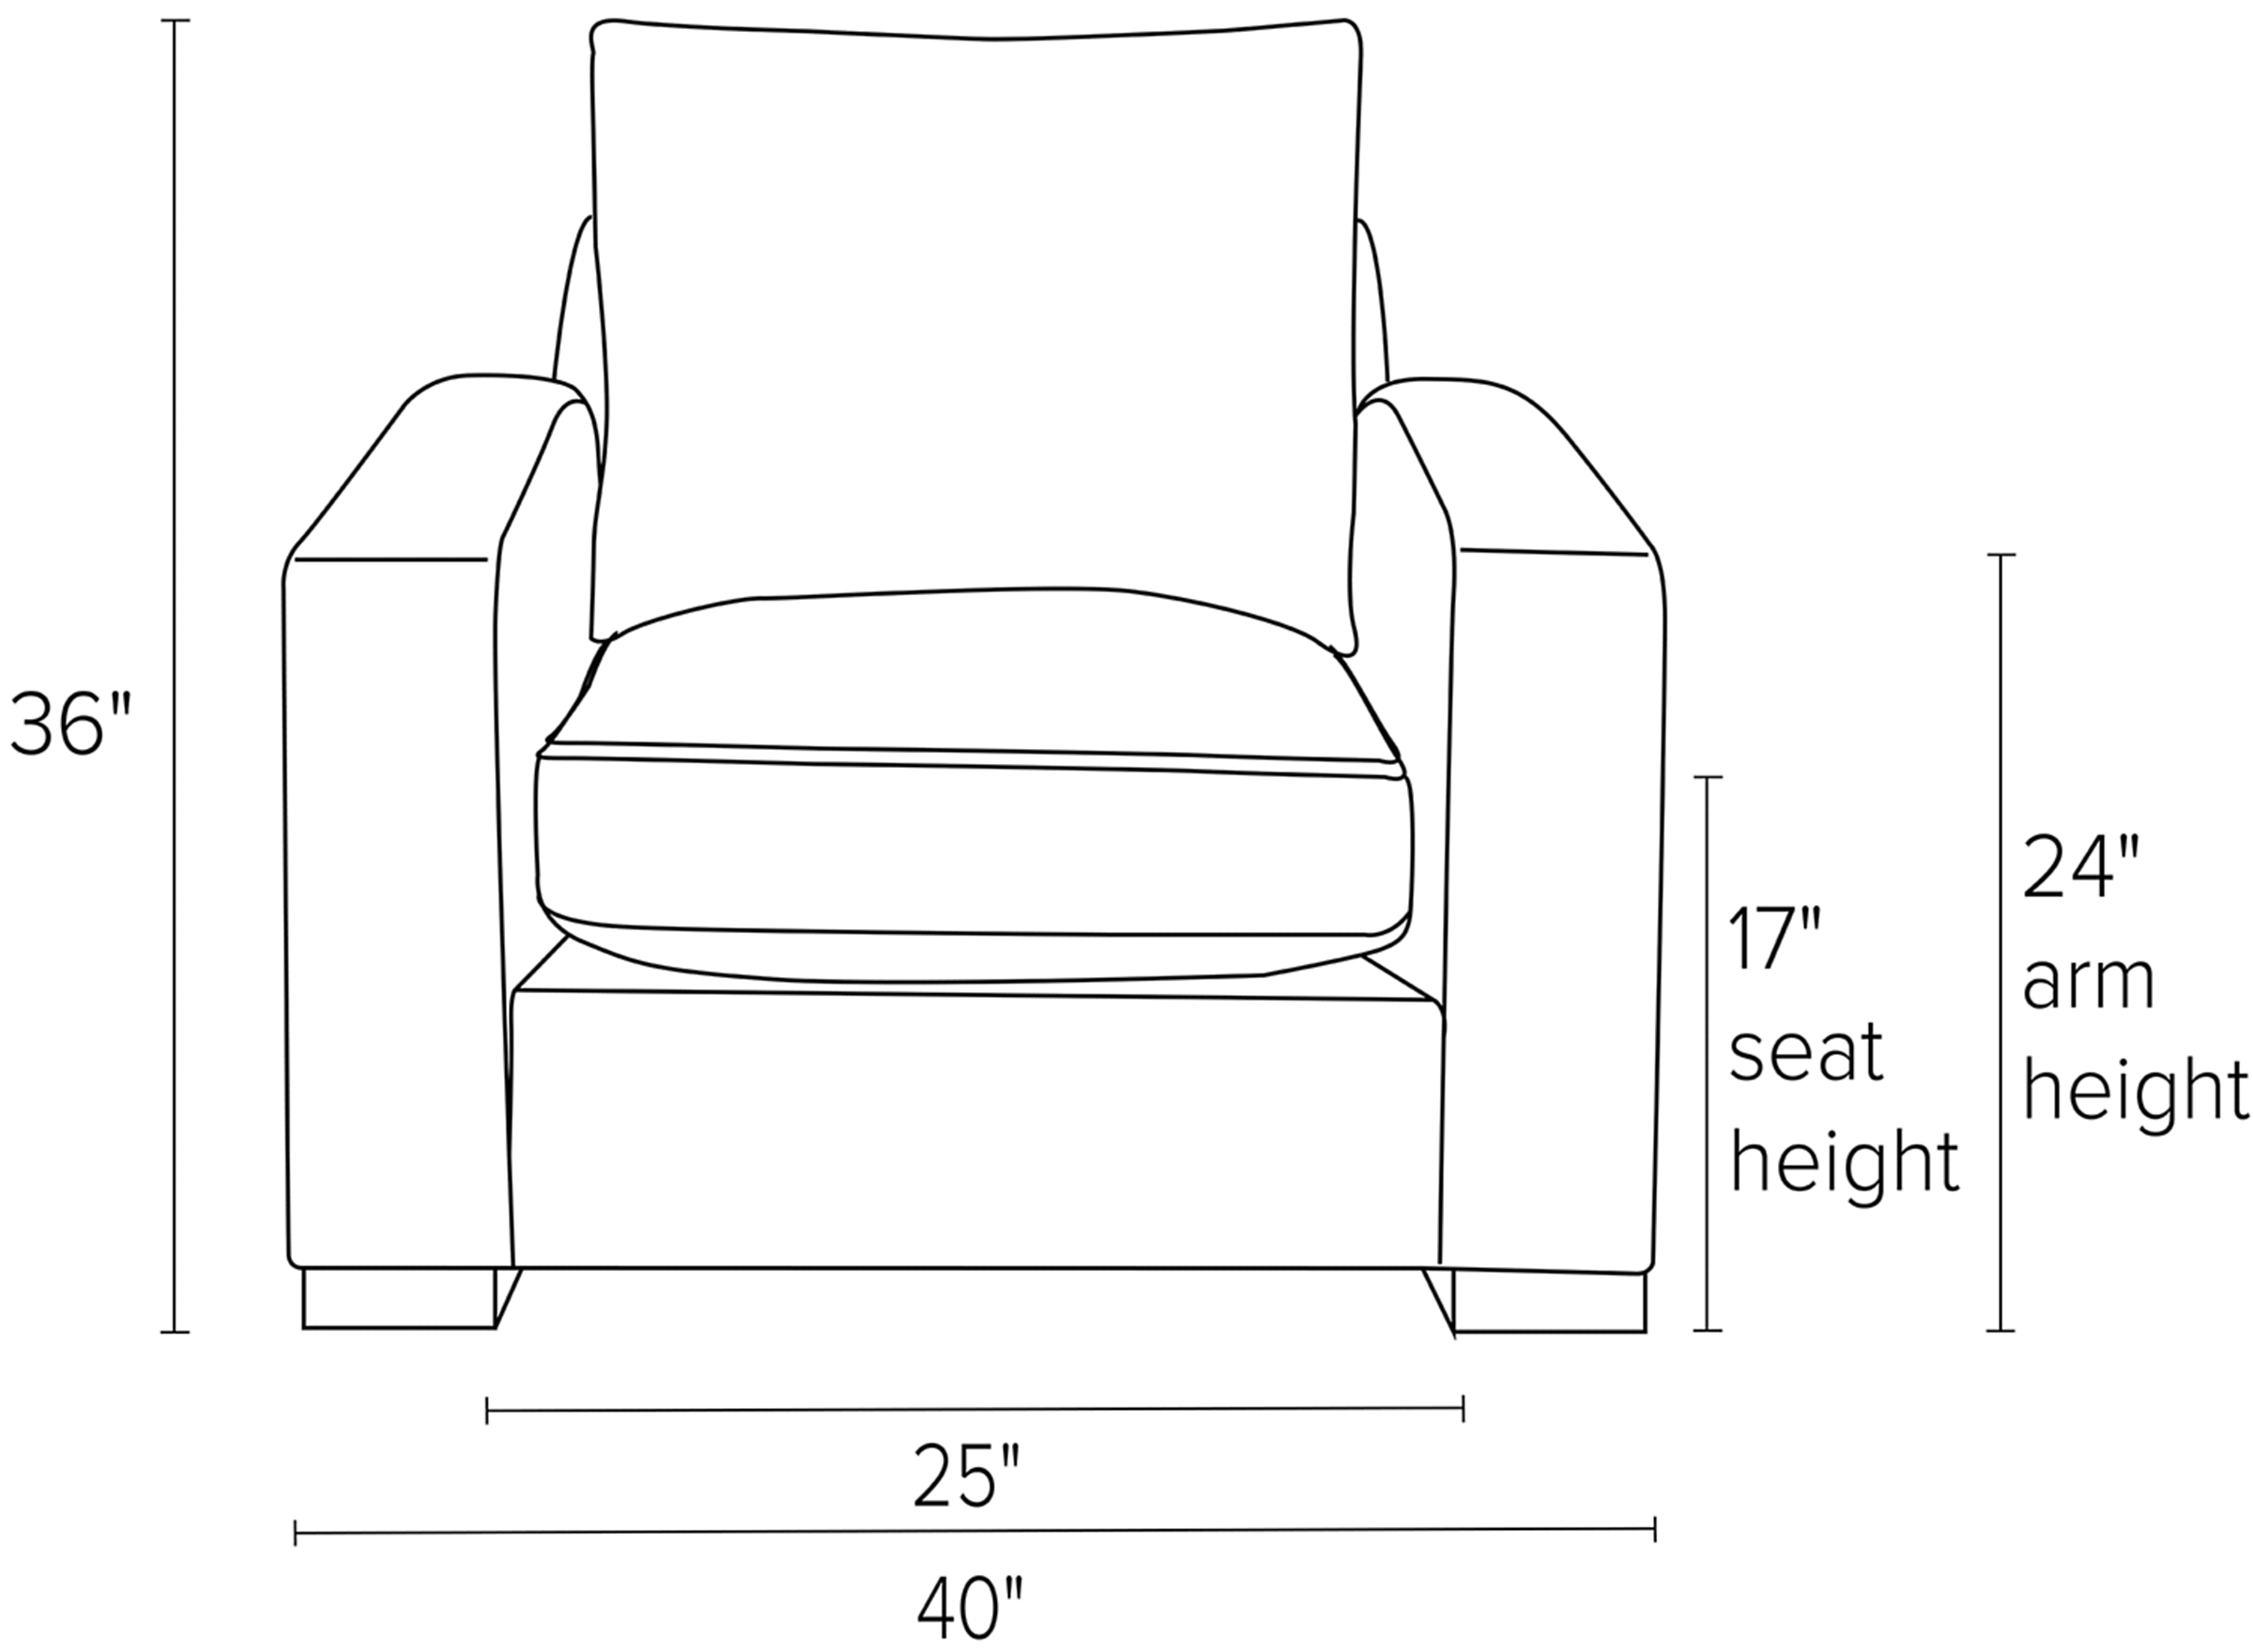 Front view dimension illustration of Metro chair.